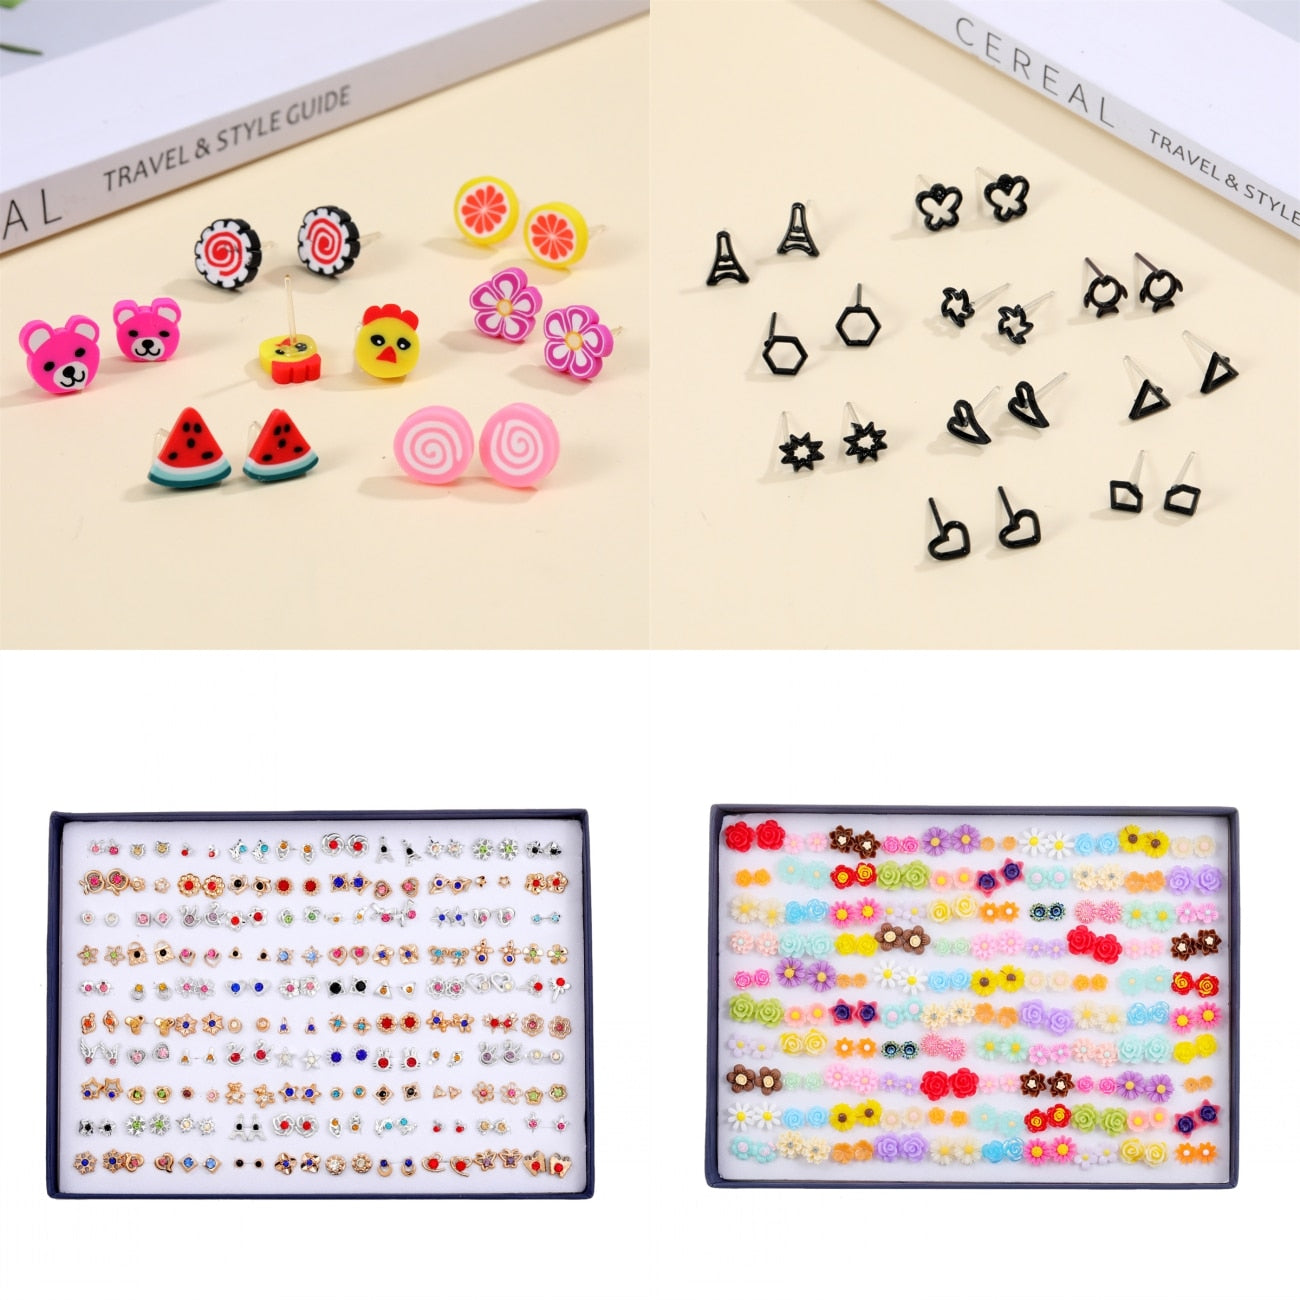 Wholesale 100Pairs/Set Mix Style Small Stud Earrings Set for Girls Women Cute Heart Child Earring Fashion Jewelry Gift